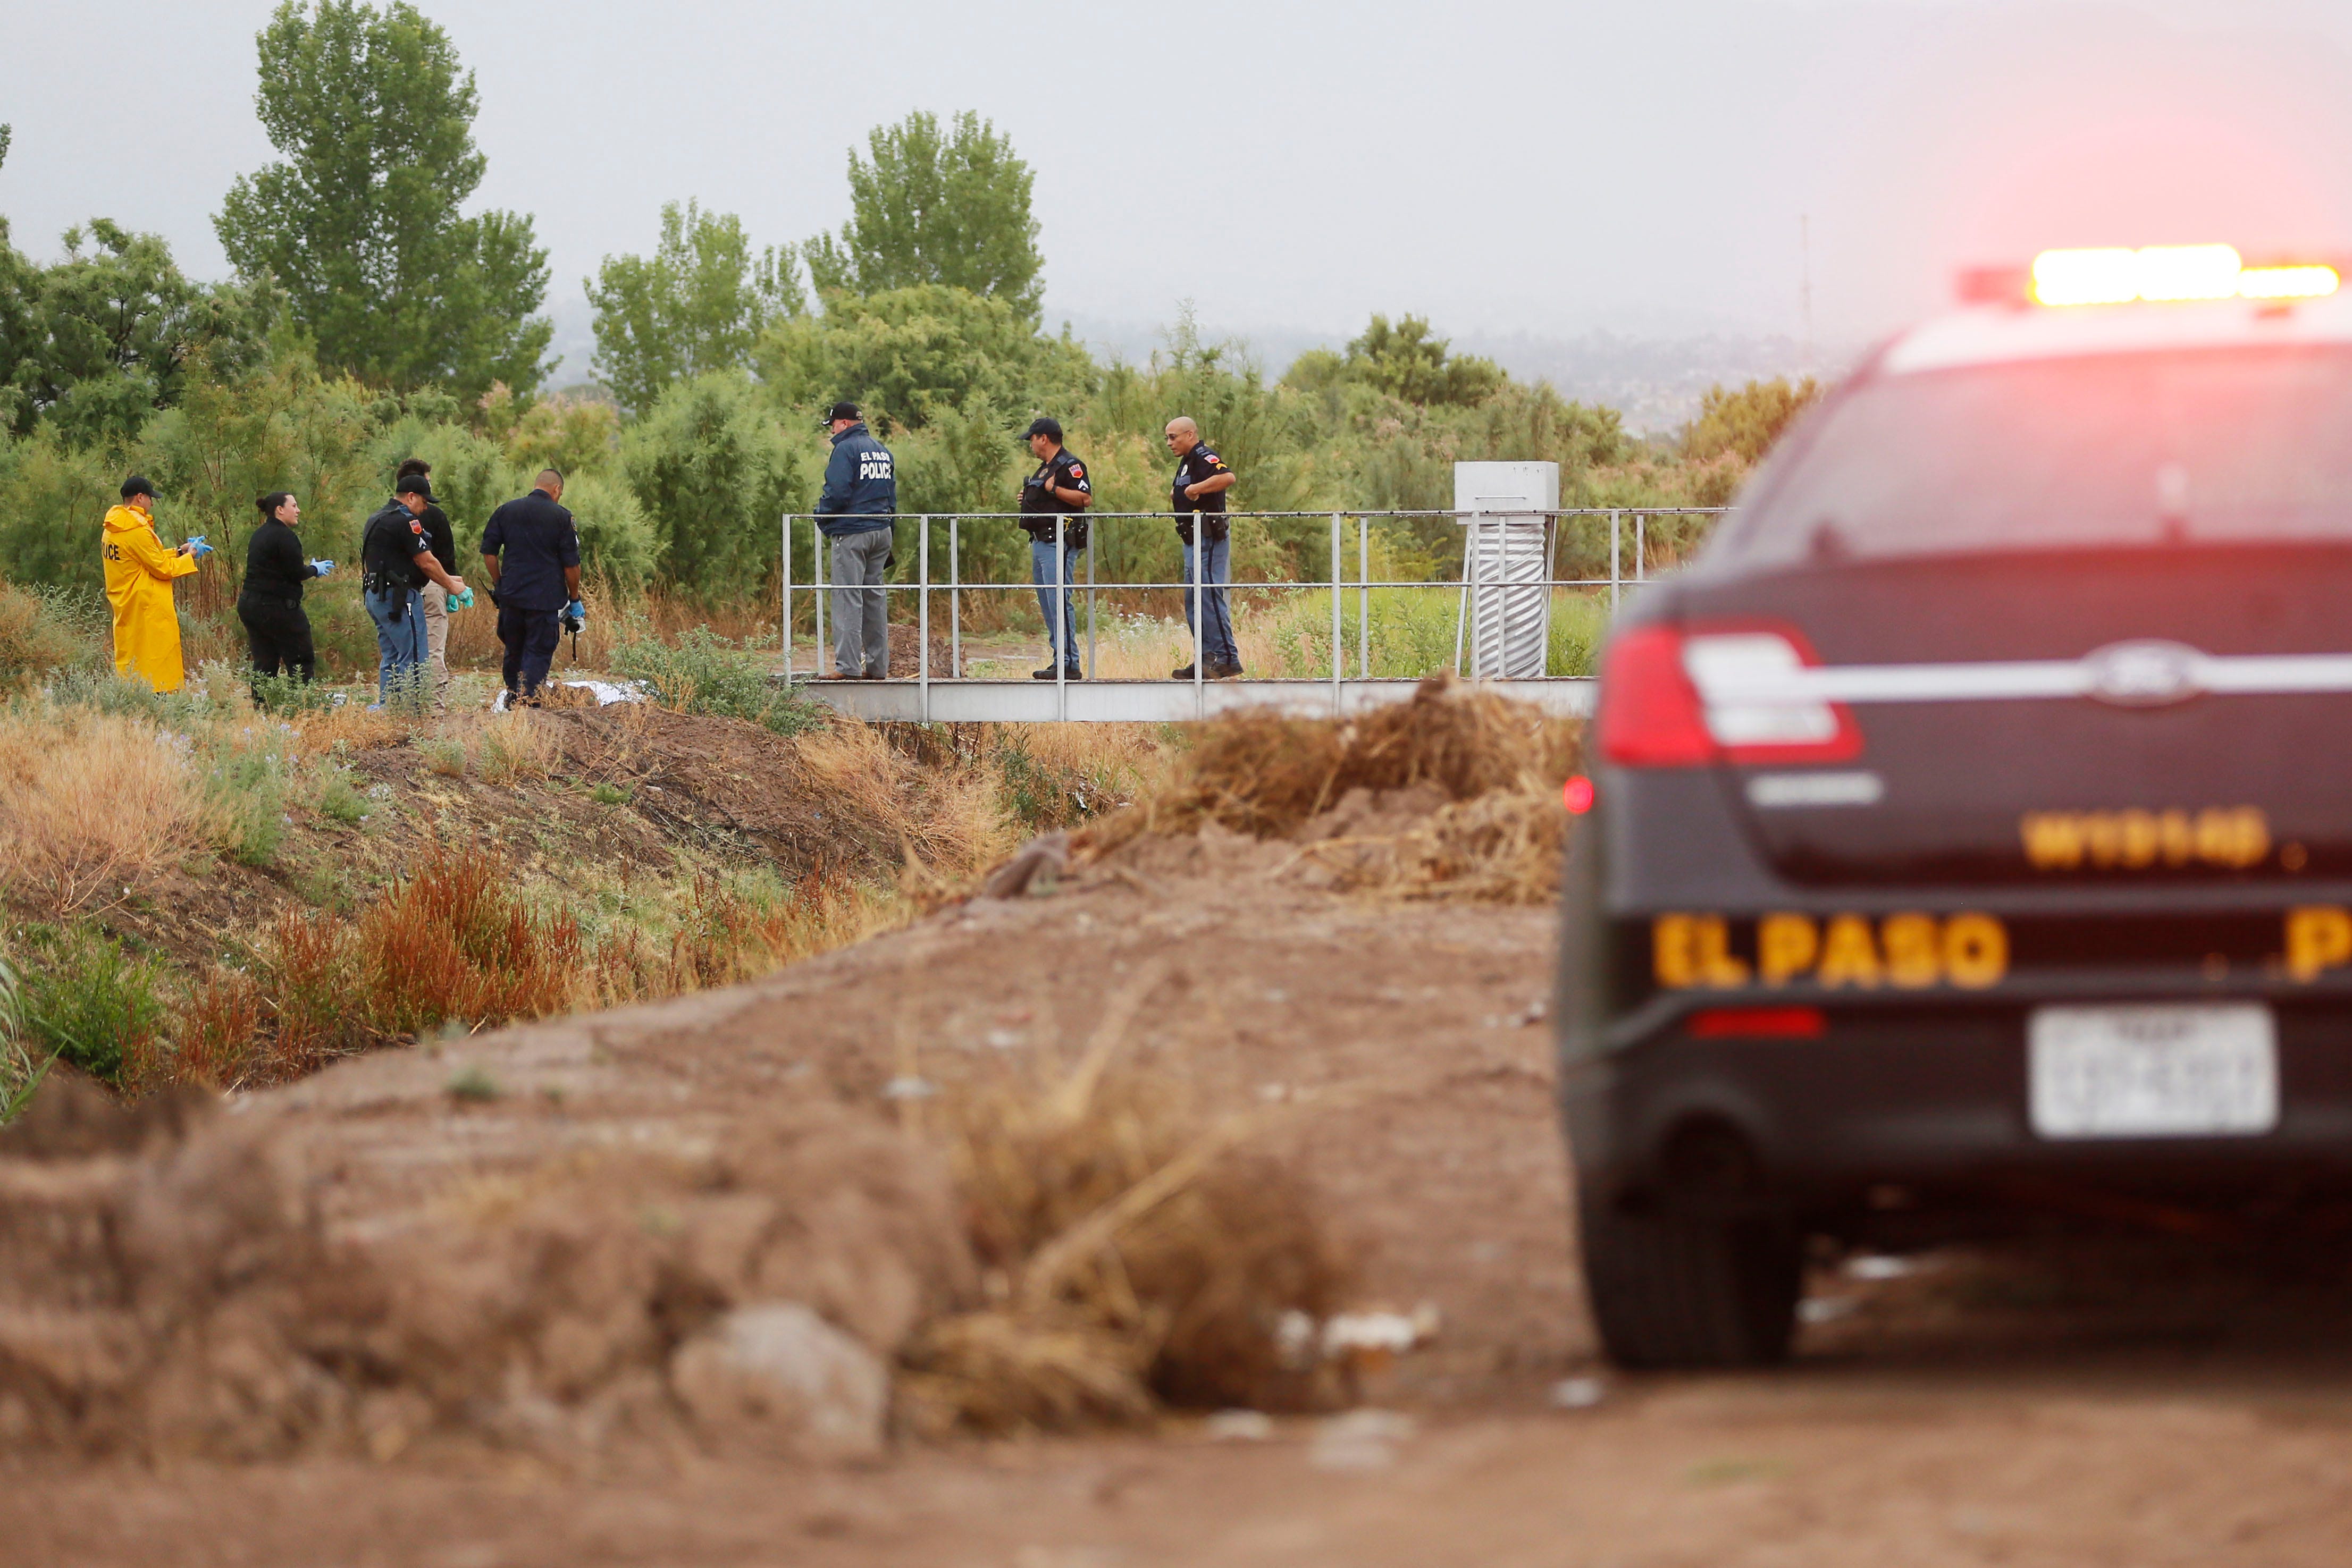 Death toll grows to 7 after bodies of man, girl found in canal in El Paso&apos;s Lower Valley